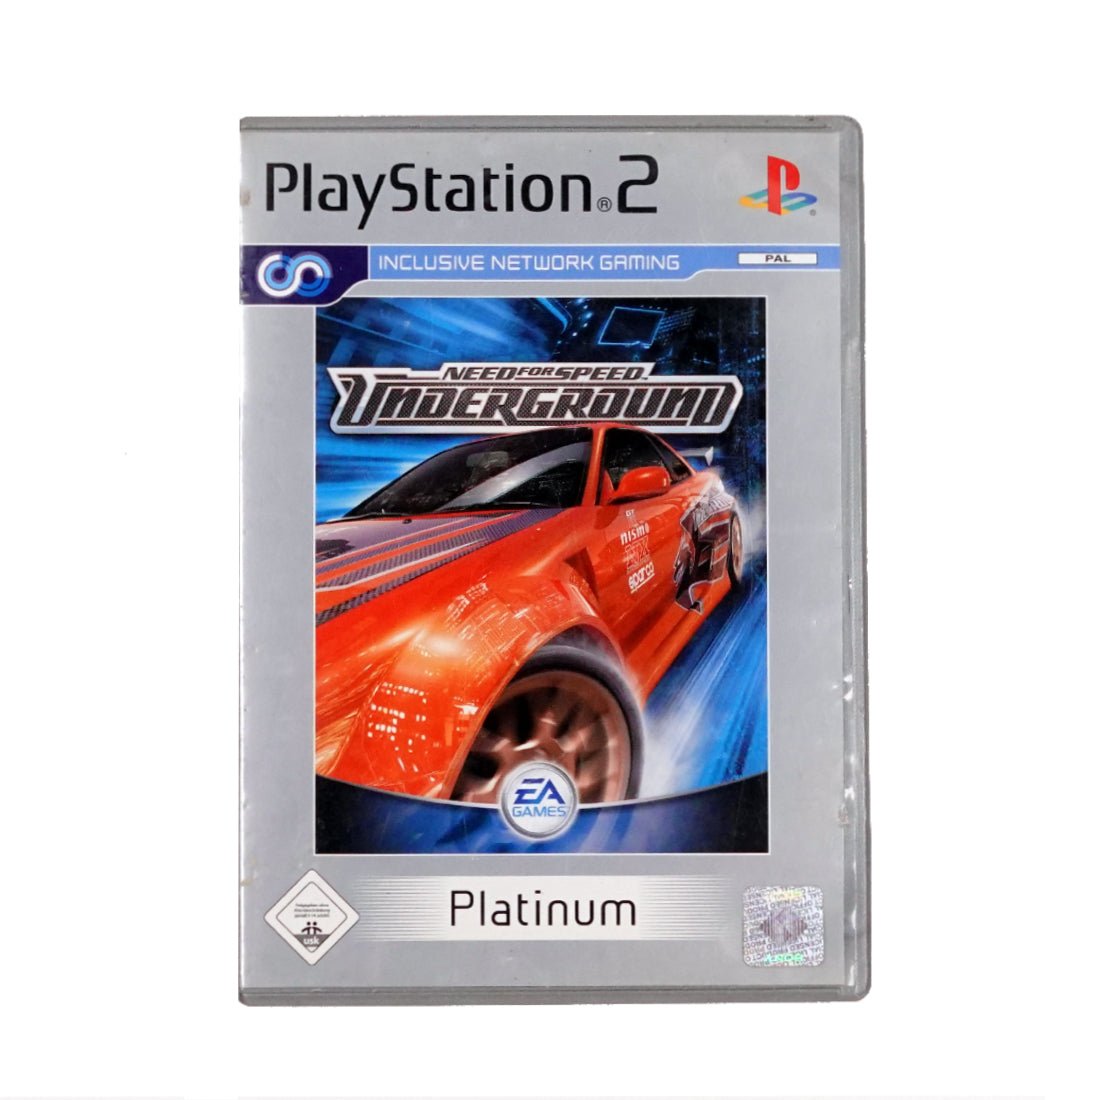 (Pre-Owned) Need For Speed: Undergound - PlayStation 2 - Store 974 | ستور ٩٧٤